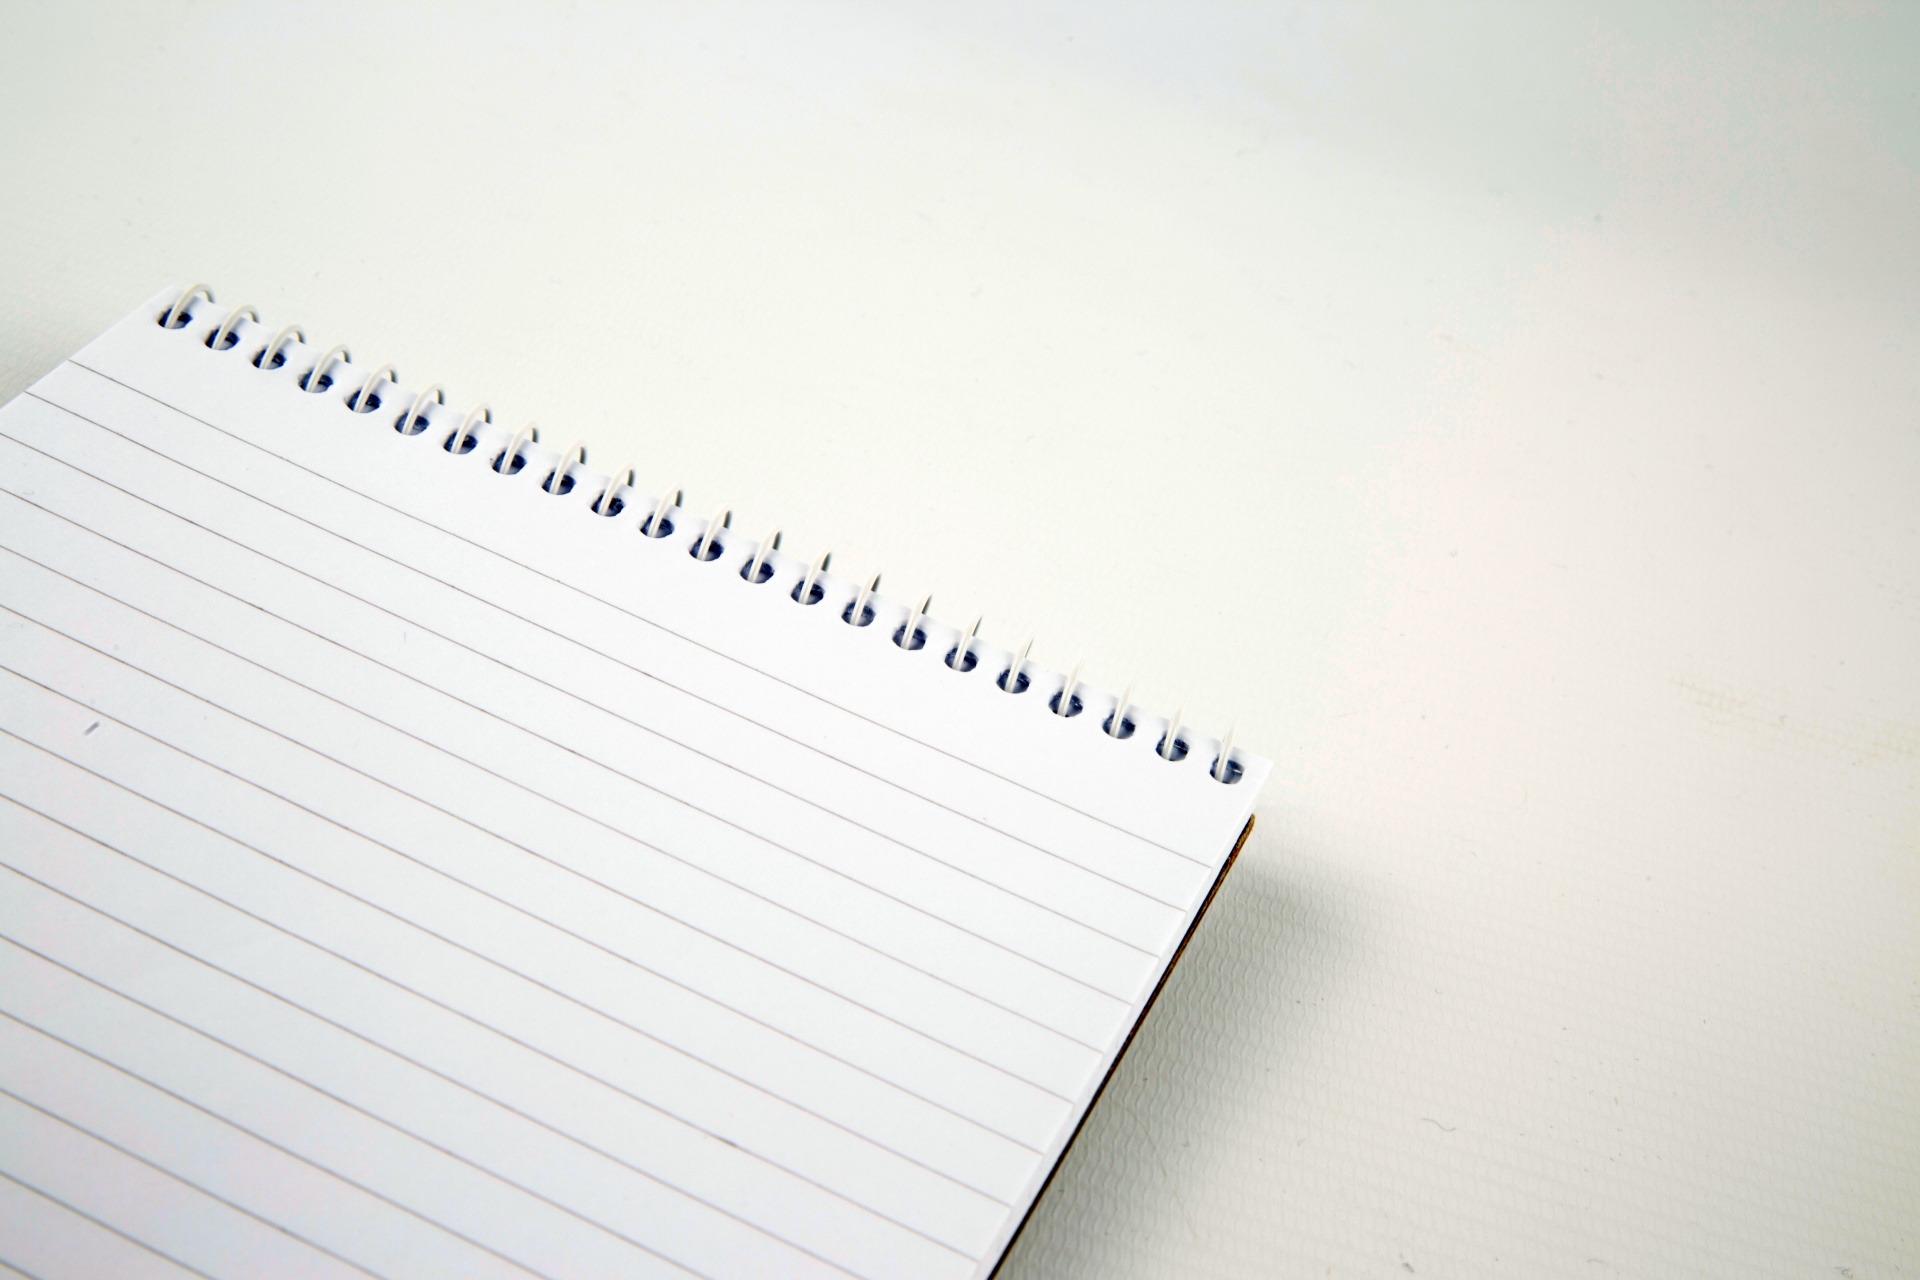 lined-paper-free-stock-photo-public-domain-pictures